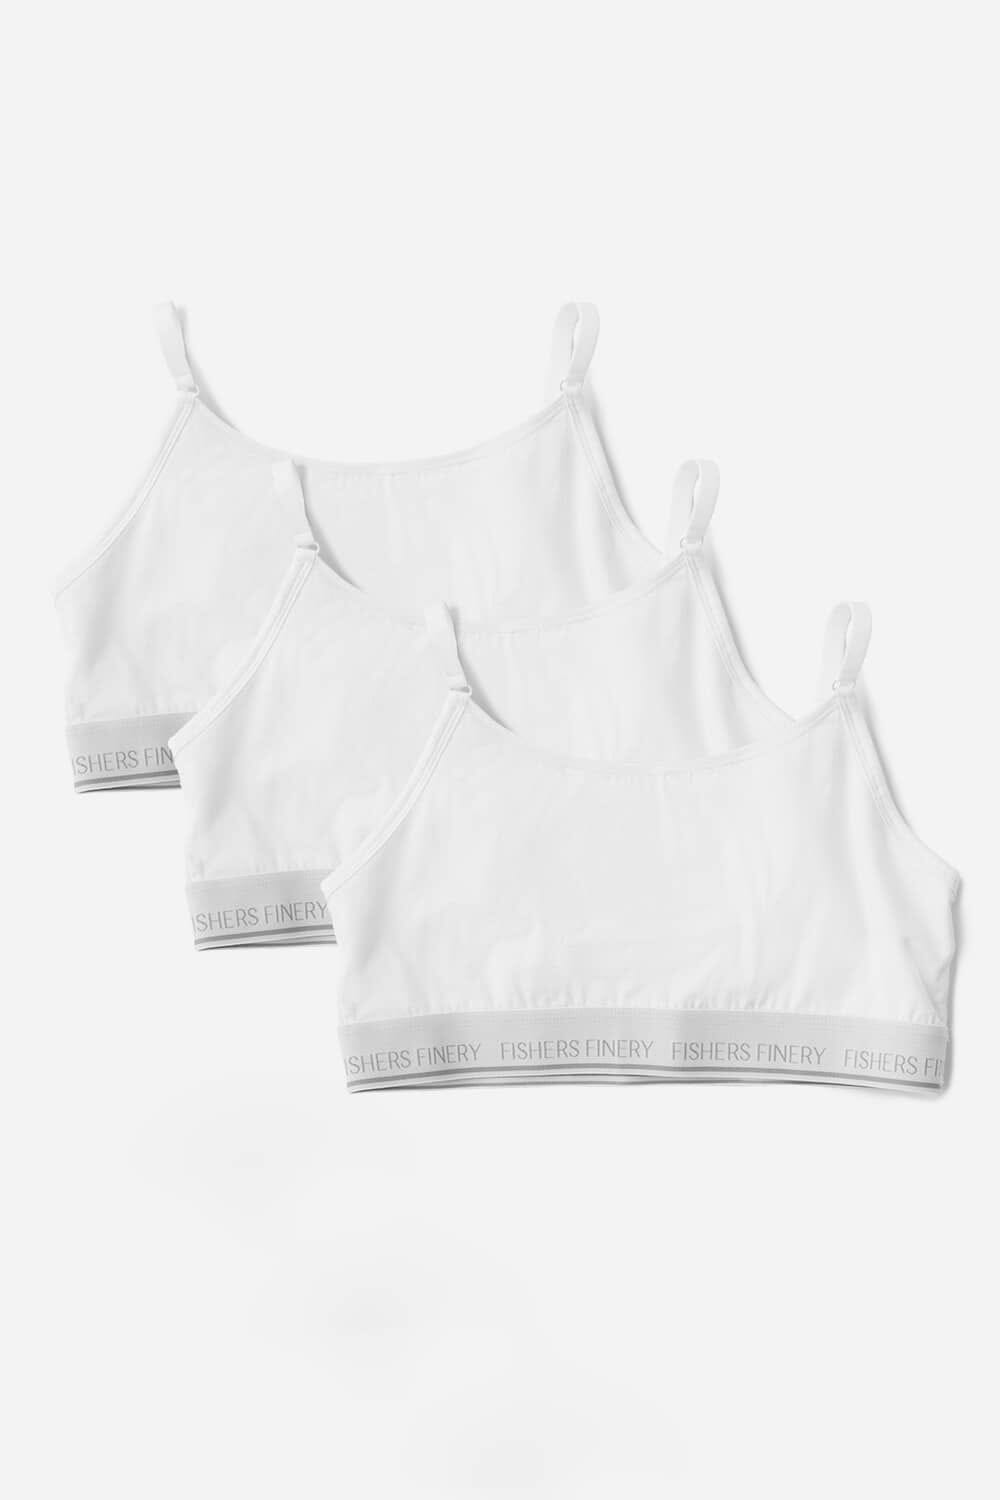 Women's Everyday Lightweight Adjustable Bralette Womens>Casual>Bra Fishers Finery White X-Small 3 Pack